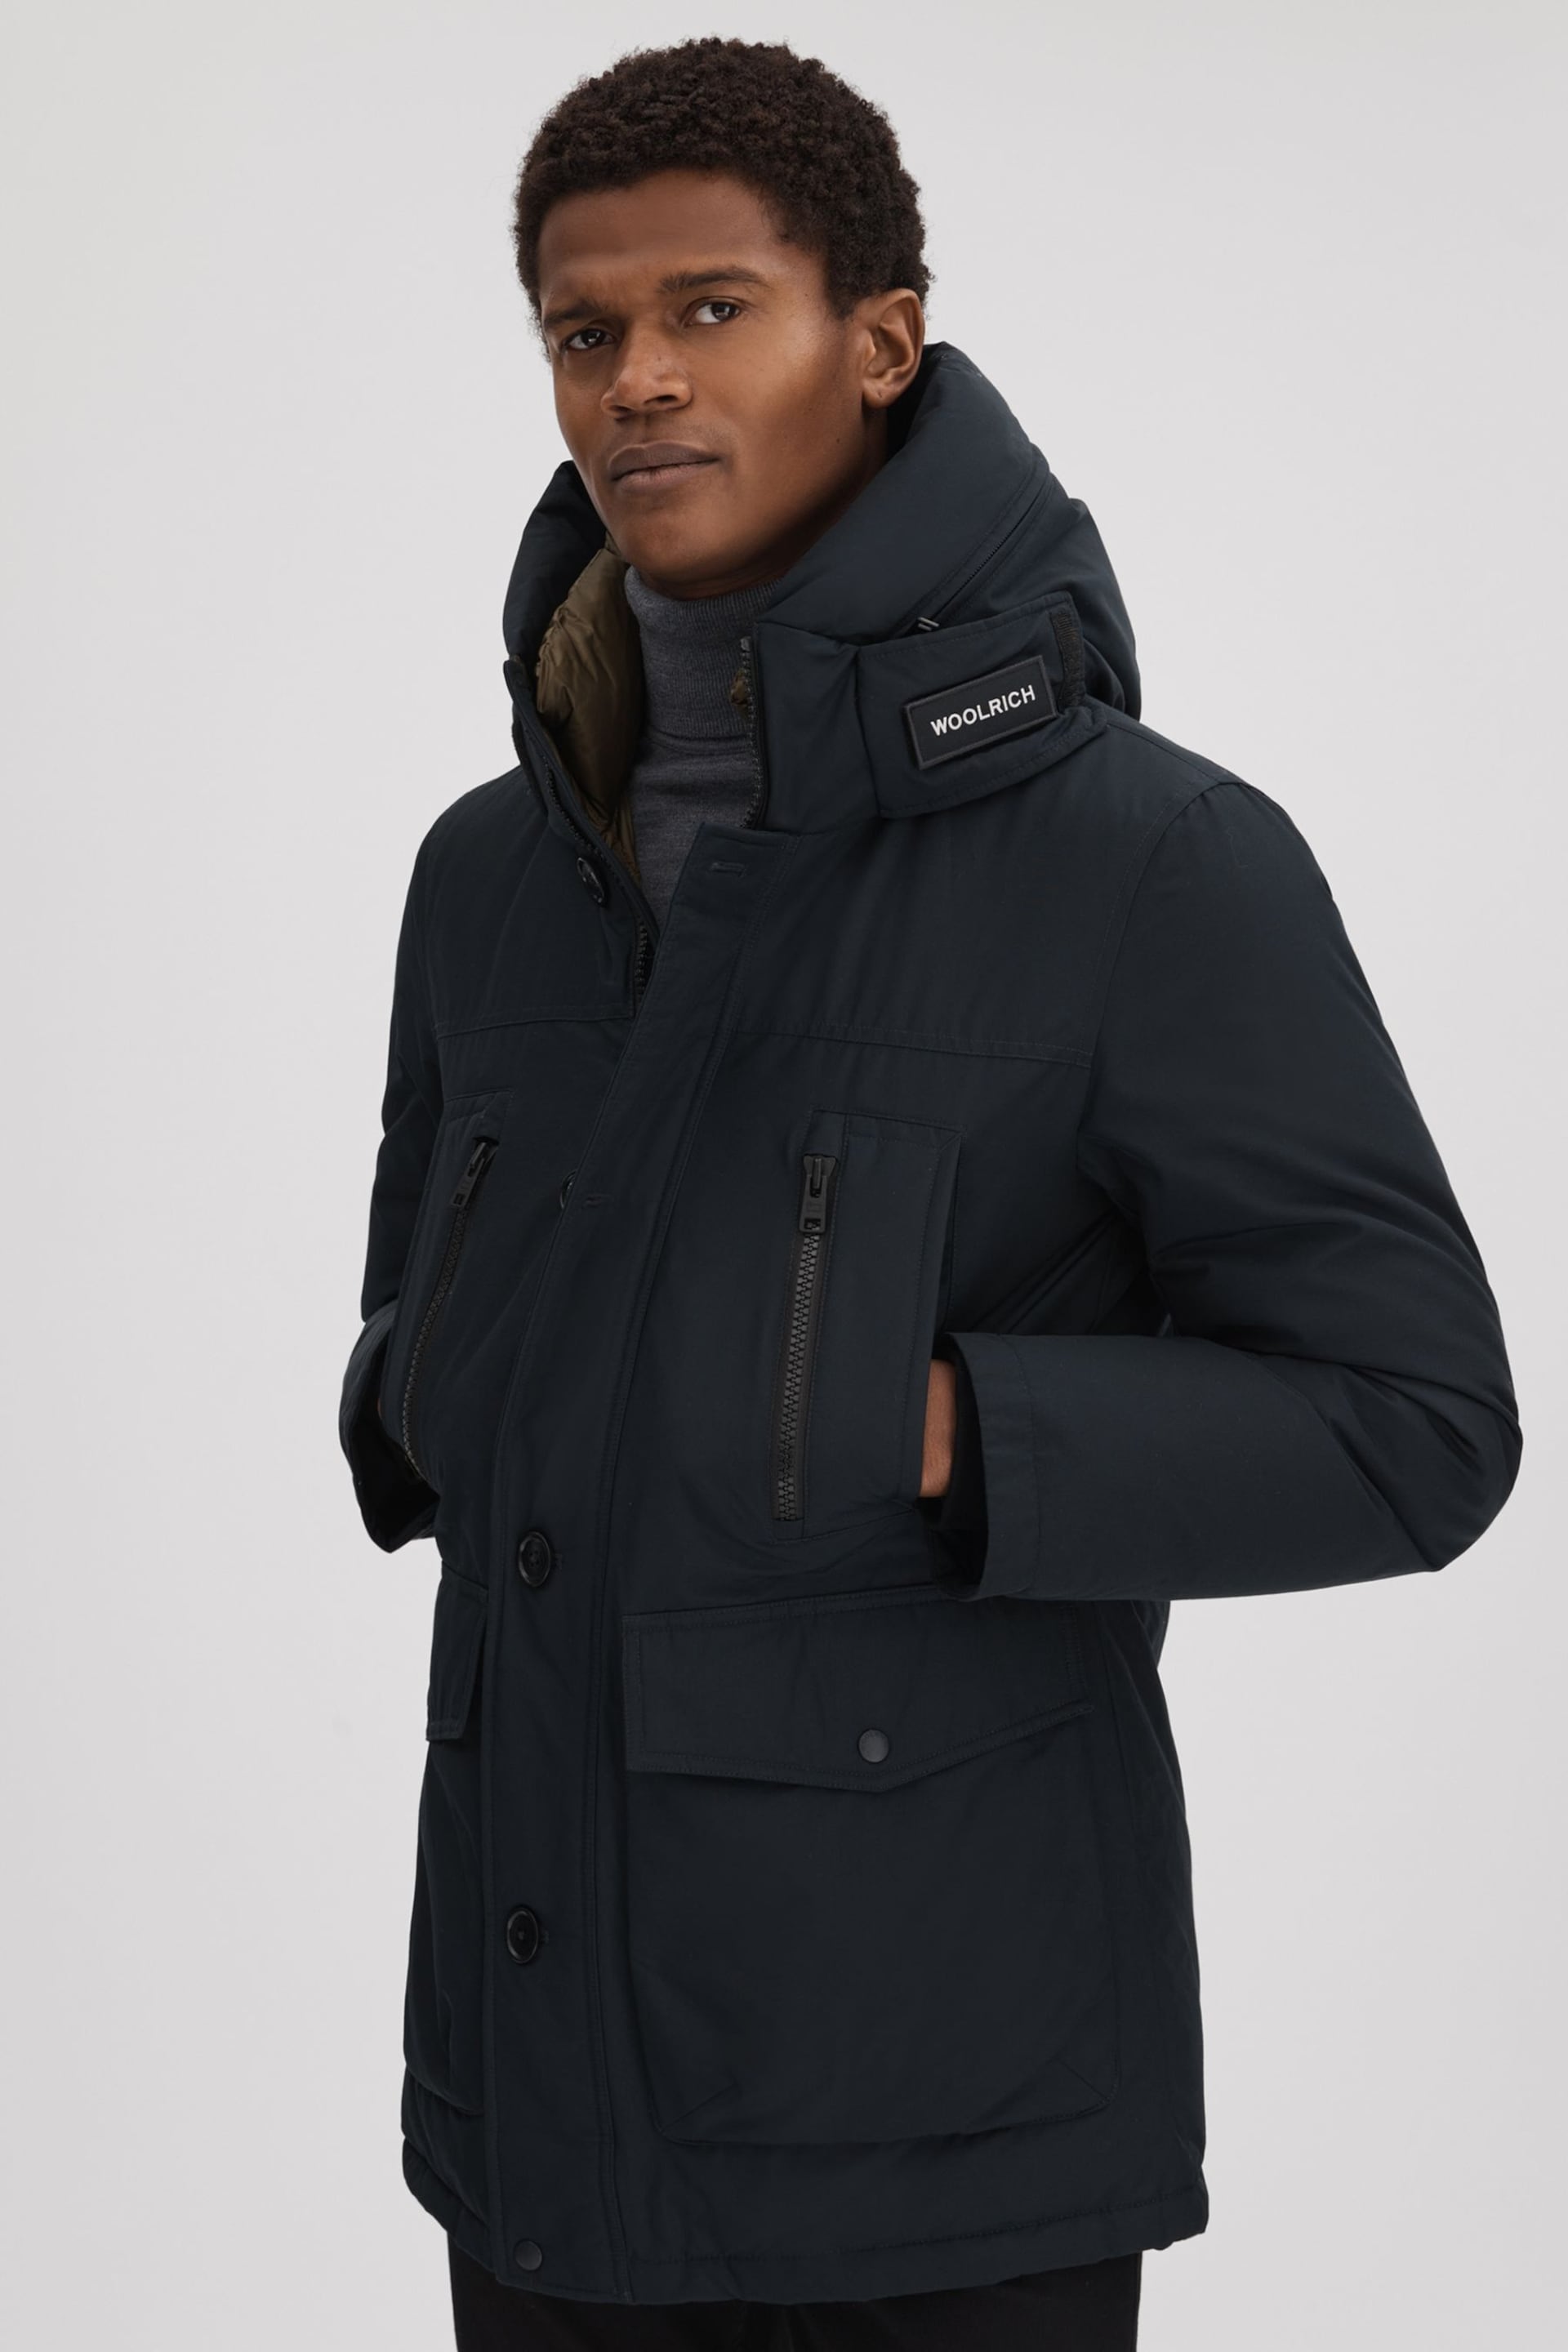 Woolrich Hooded Parka Coat - Image 1 of 8